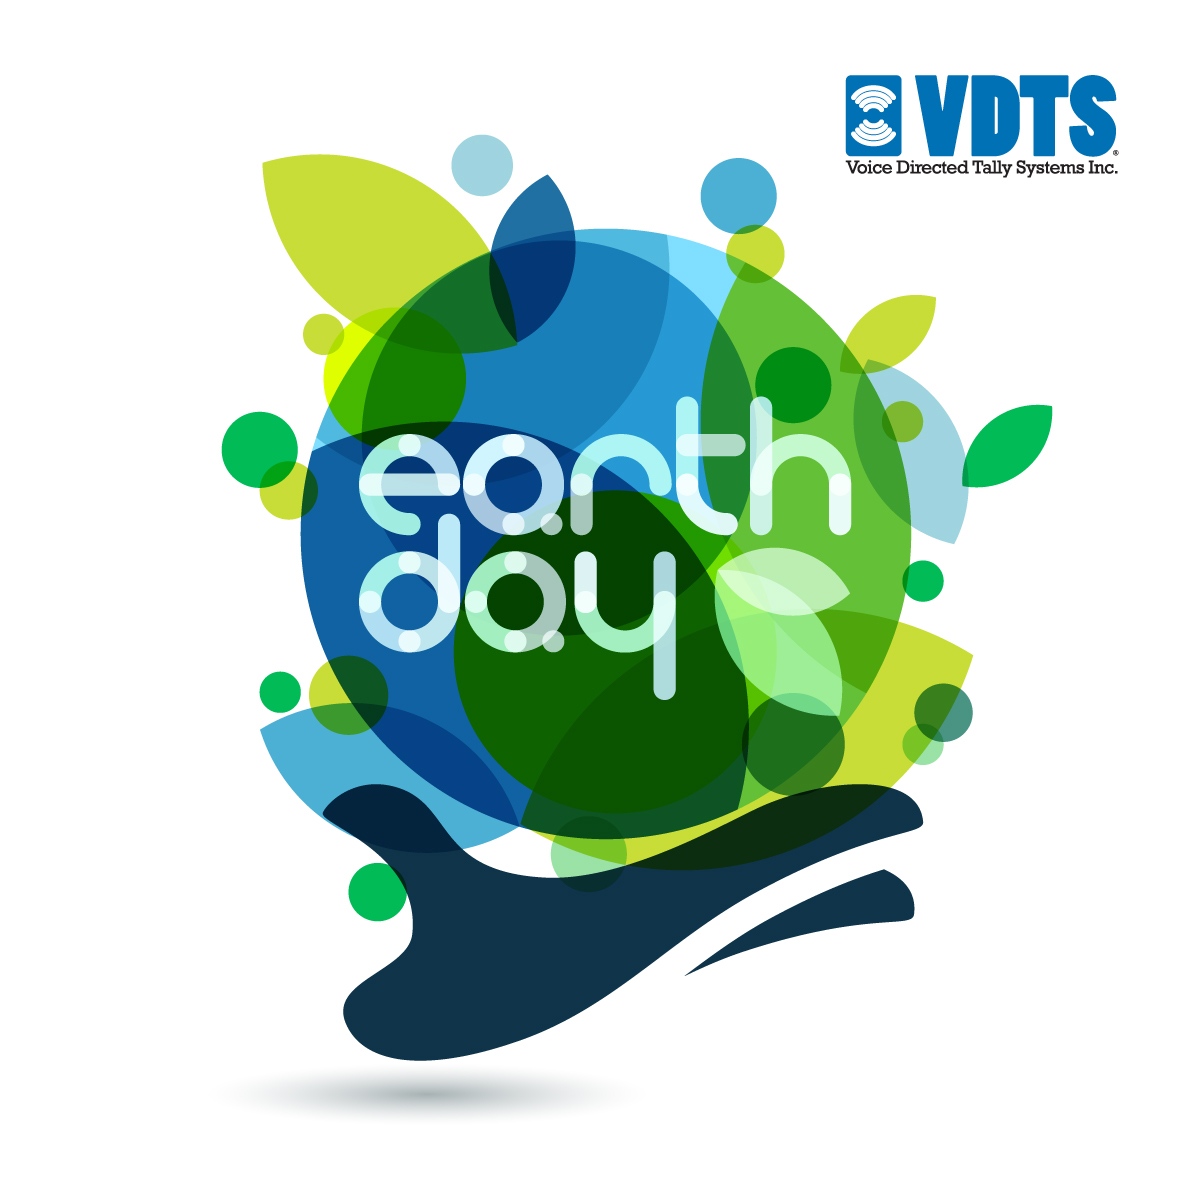 Happy Earth Day!

vdts.ca

#giomatics #research #earthday
#urbanforestry #forestry #datacollection #handsfree #voicetechnology #realwear